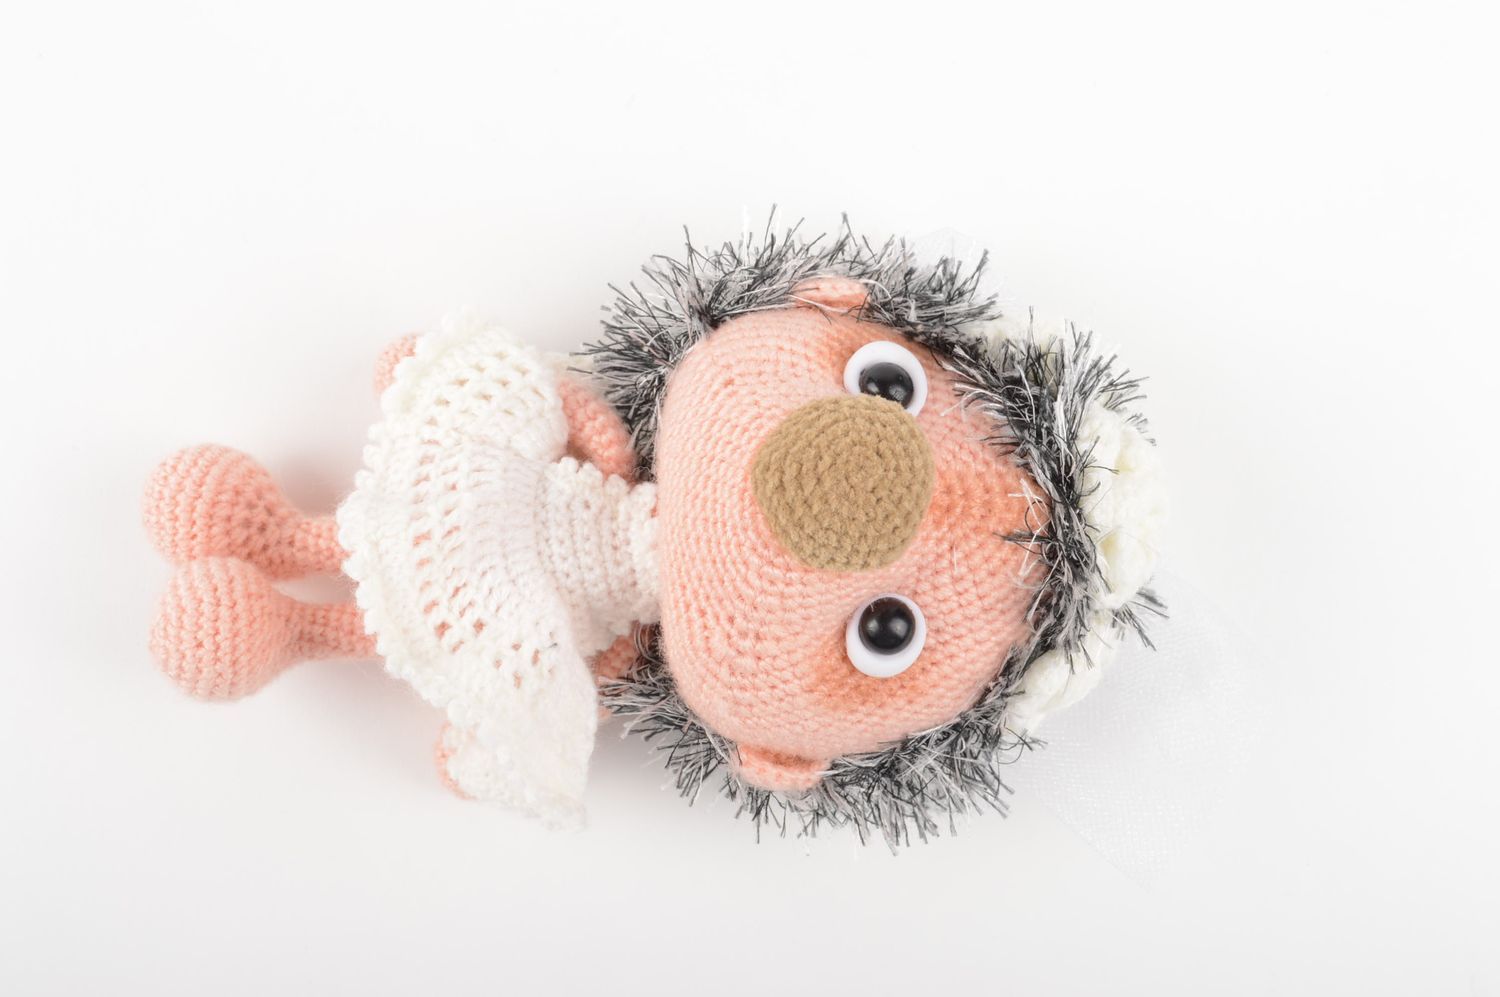 Handmade beautiful soft toy designer crocheted toy unusual toy for kids photo 3